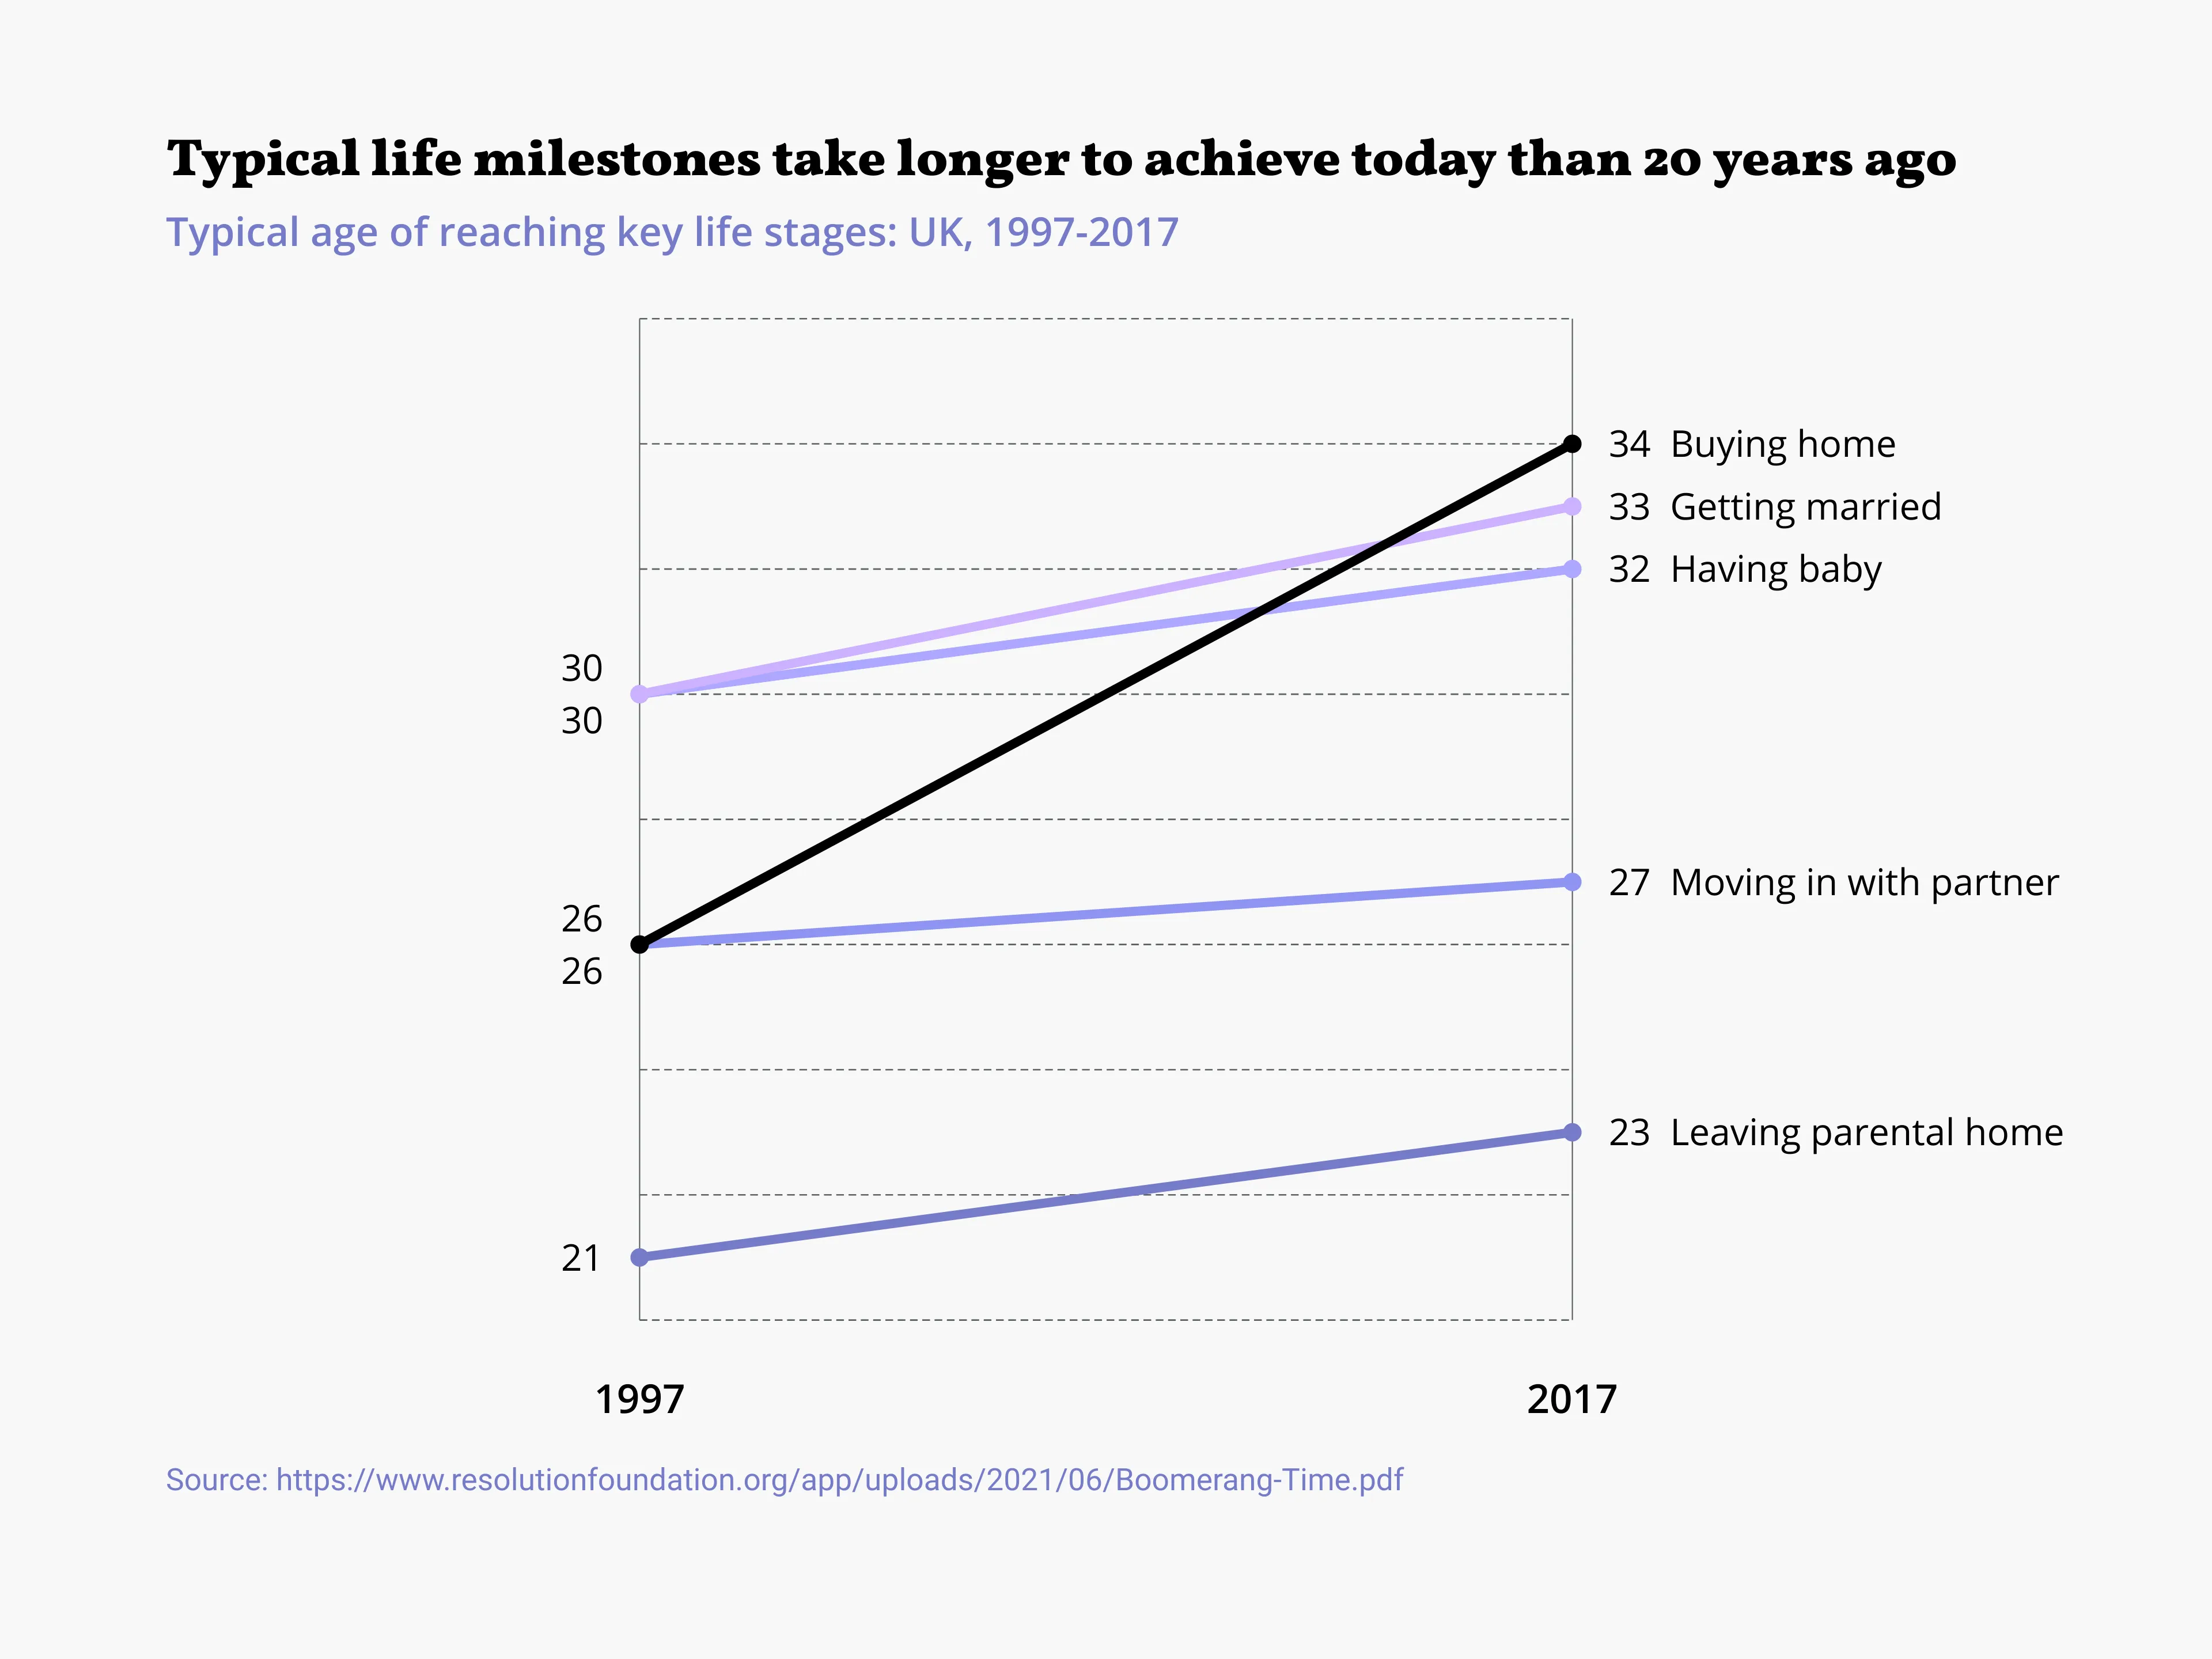 Typical life milestones take longer to achieve today than 20 years ago